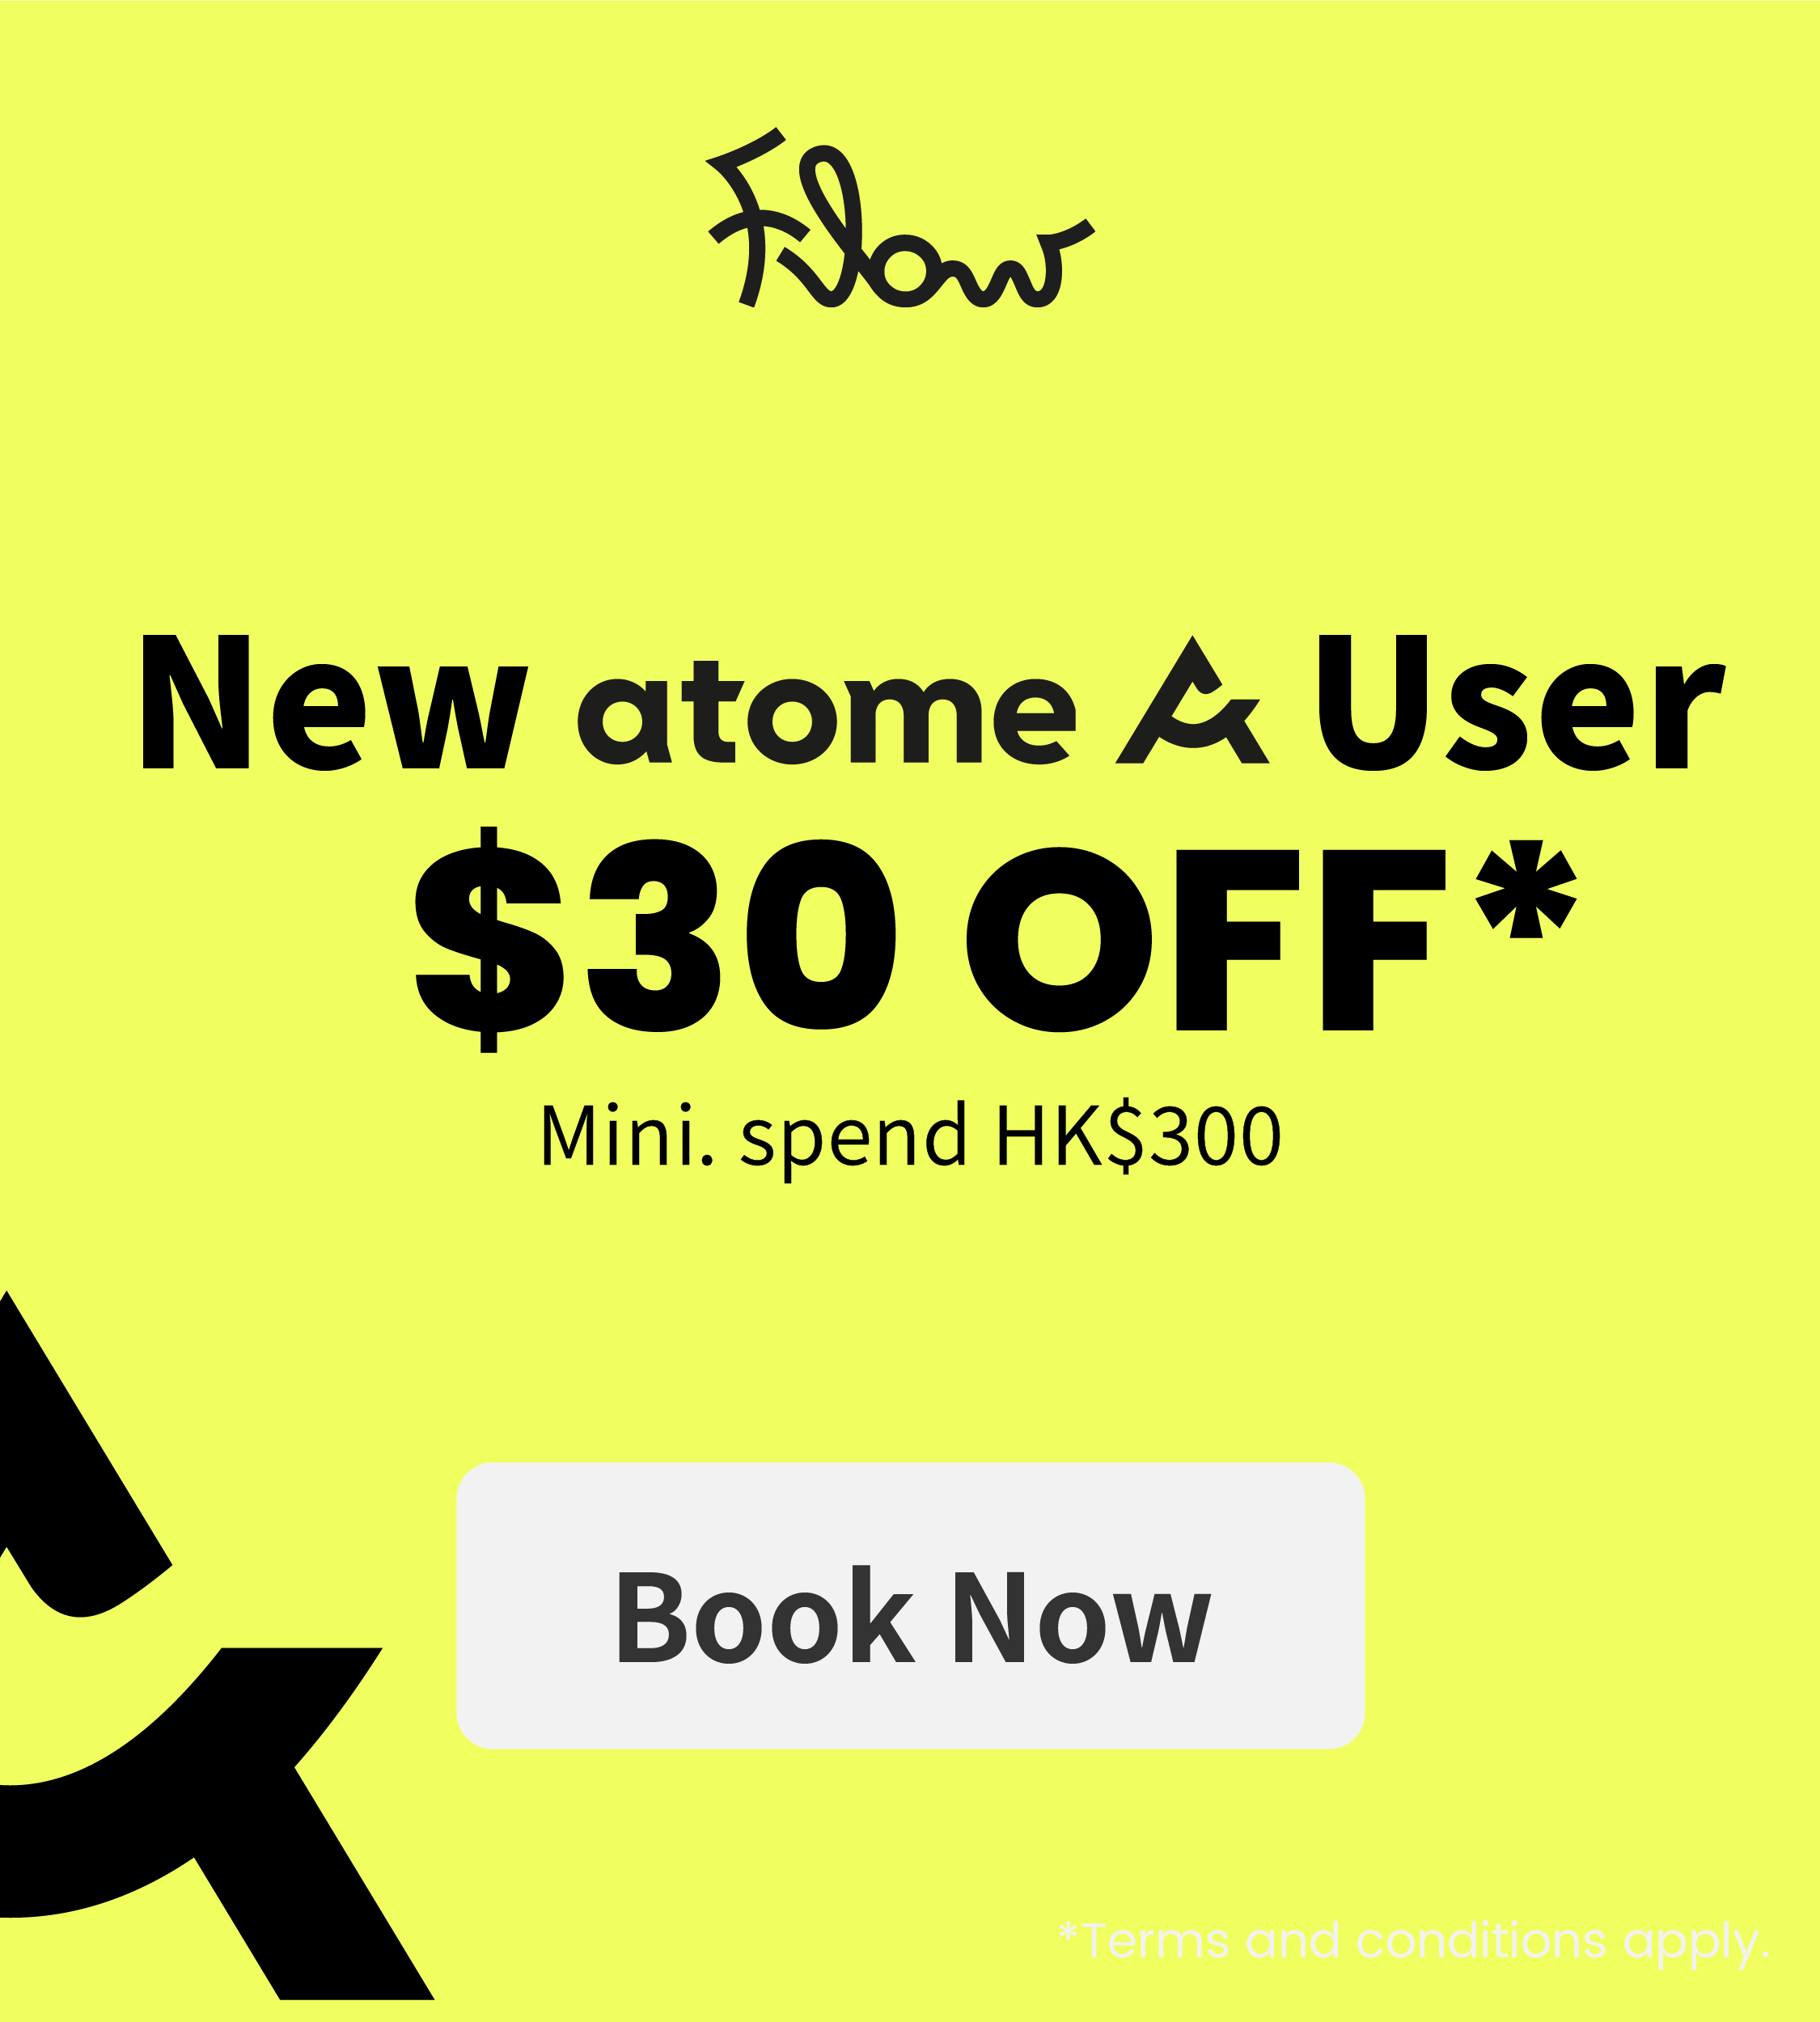 [Flow Exclusive] Atome New Users Hotel Discounts: $30 off $300